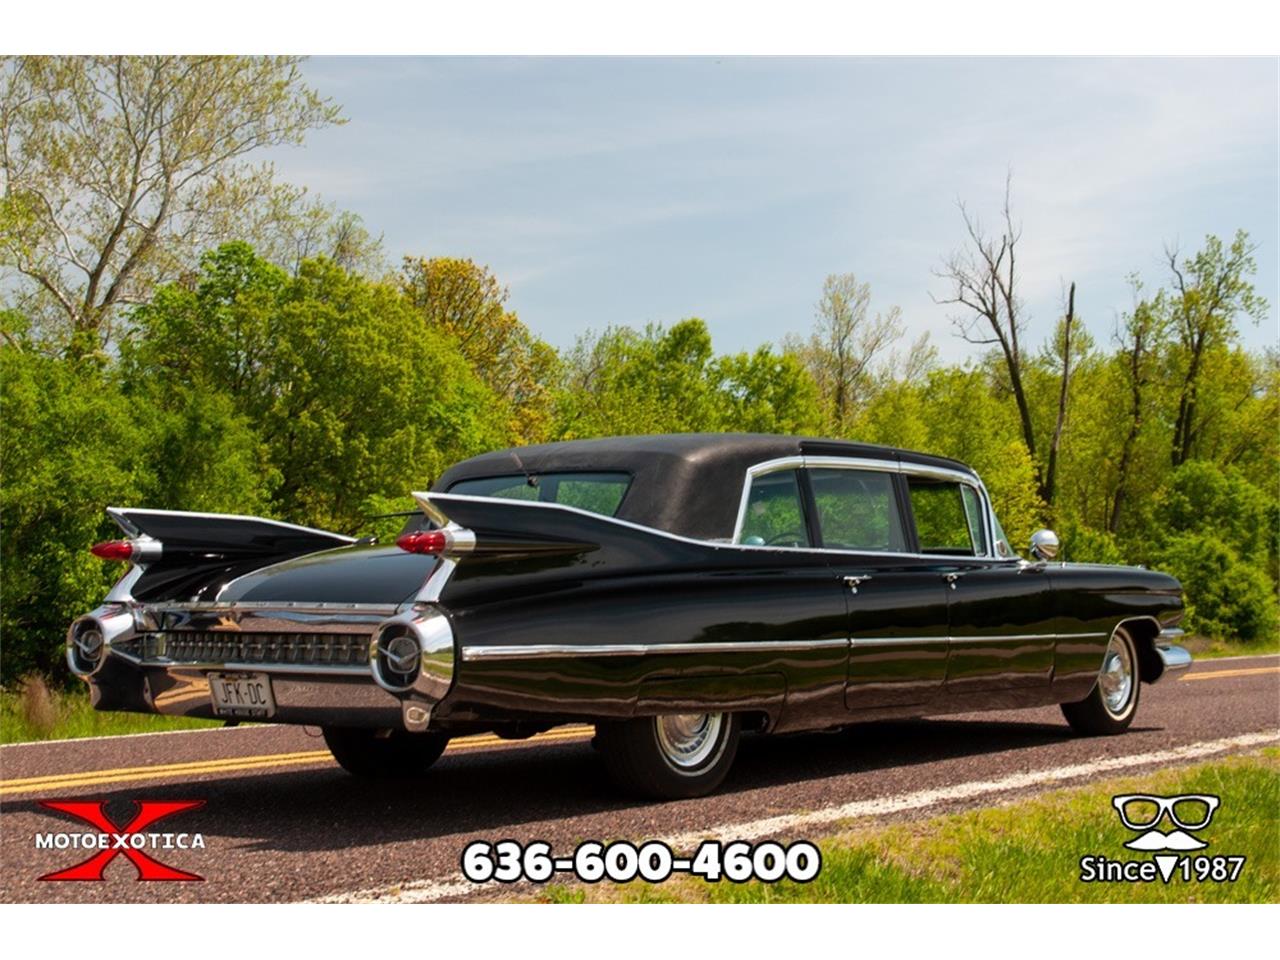 1959 cadillac fleetwood series 75 limousine for sale classiccars com cc 1092091 1959 cadillac fleetwood series 75